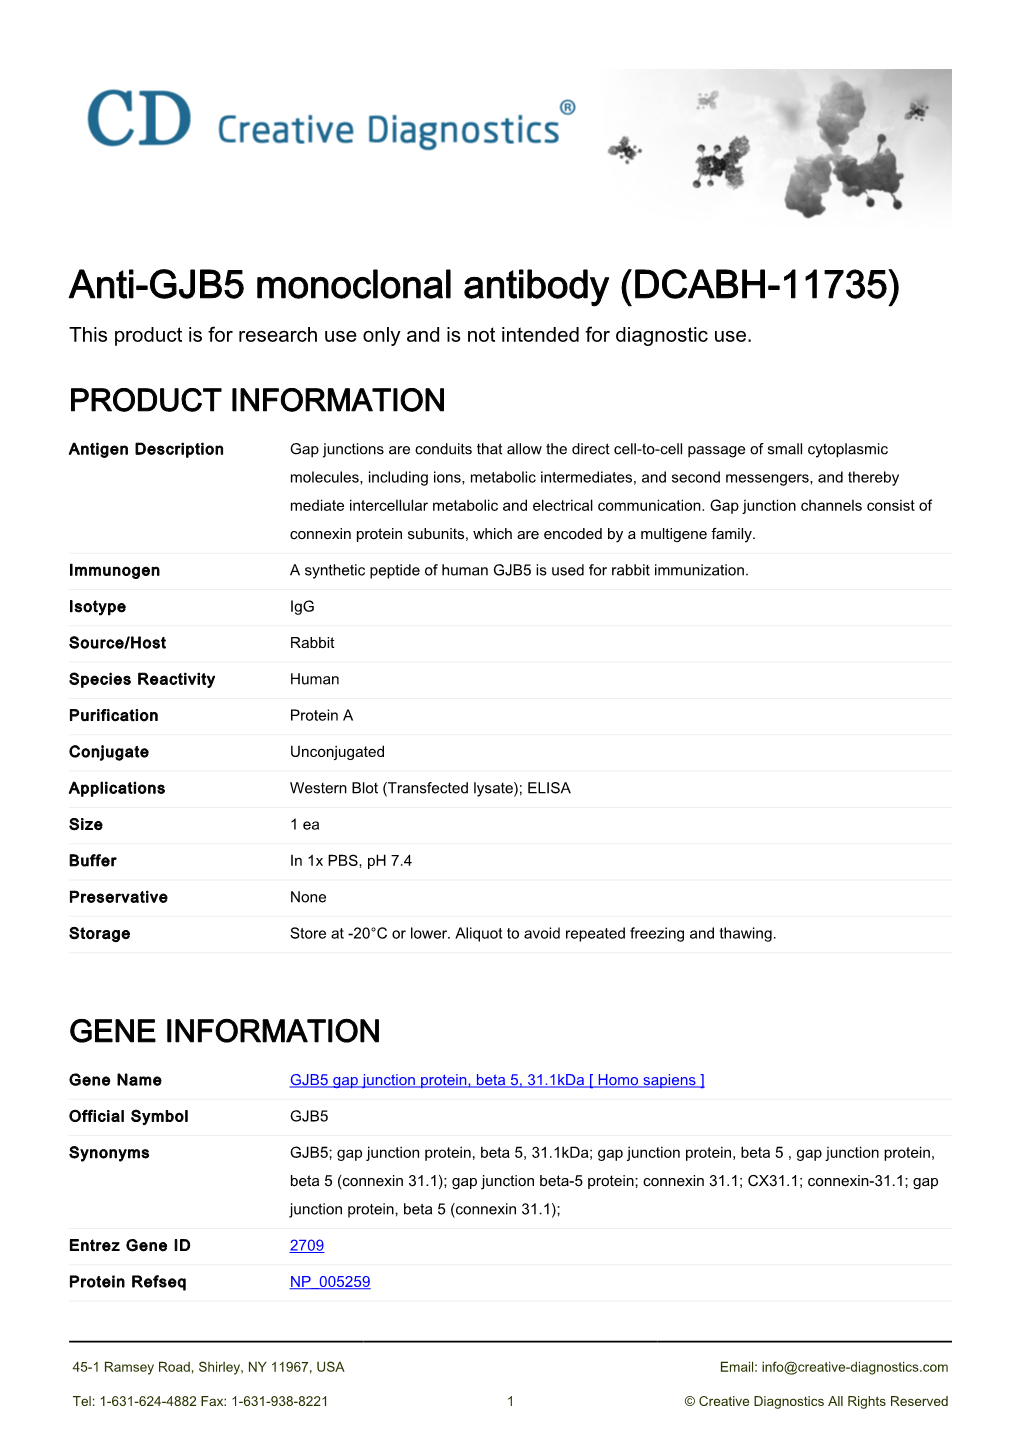 Anti-GJB5 Monoclonal Antibody (DCABH-11735) This Product Is for Research Use Only and Is Not Intended for Diagnostic Use